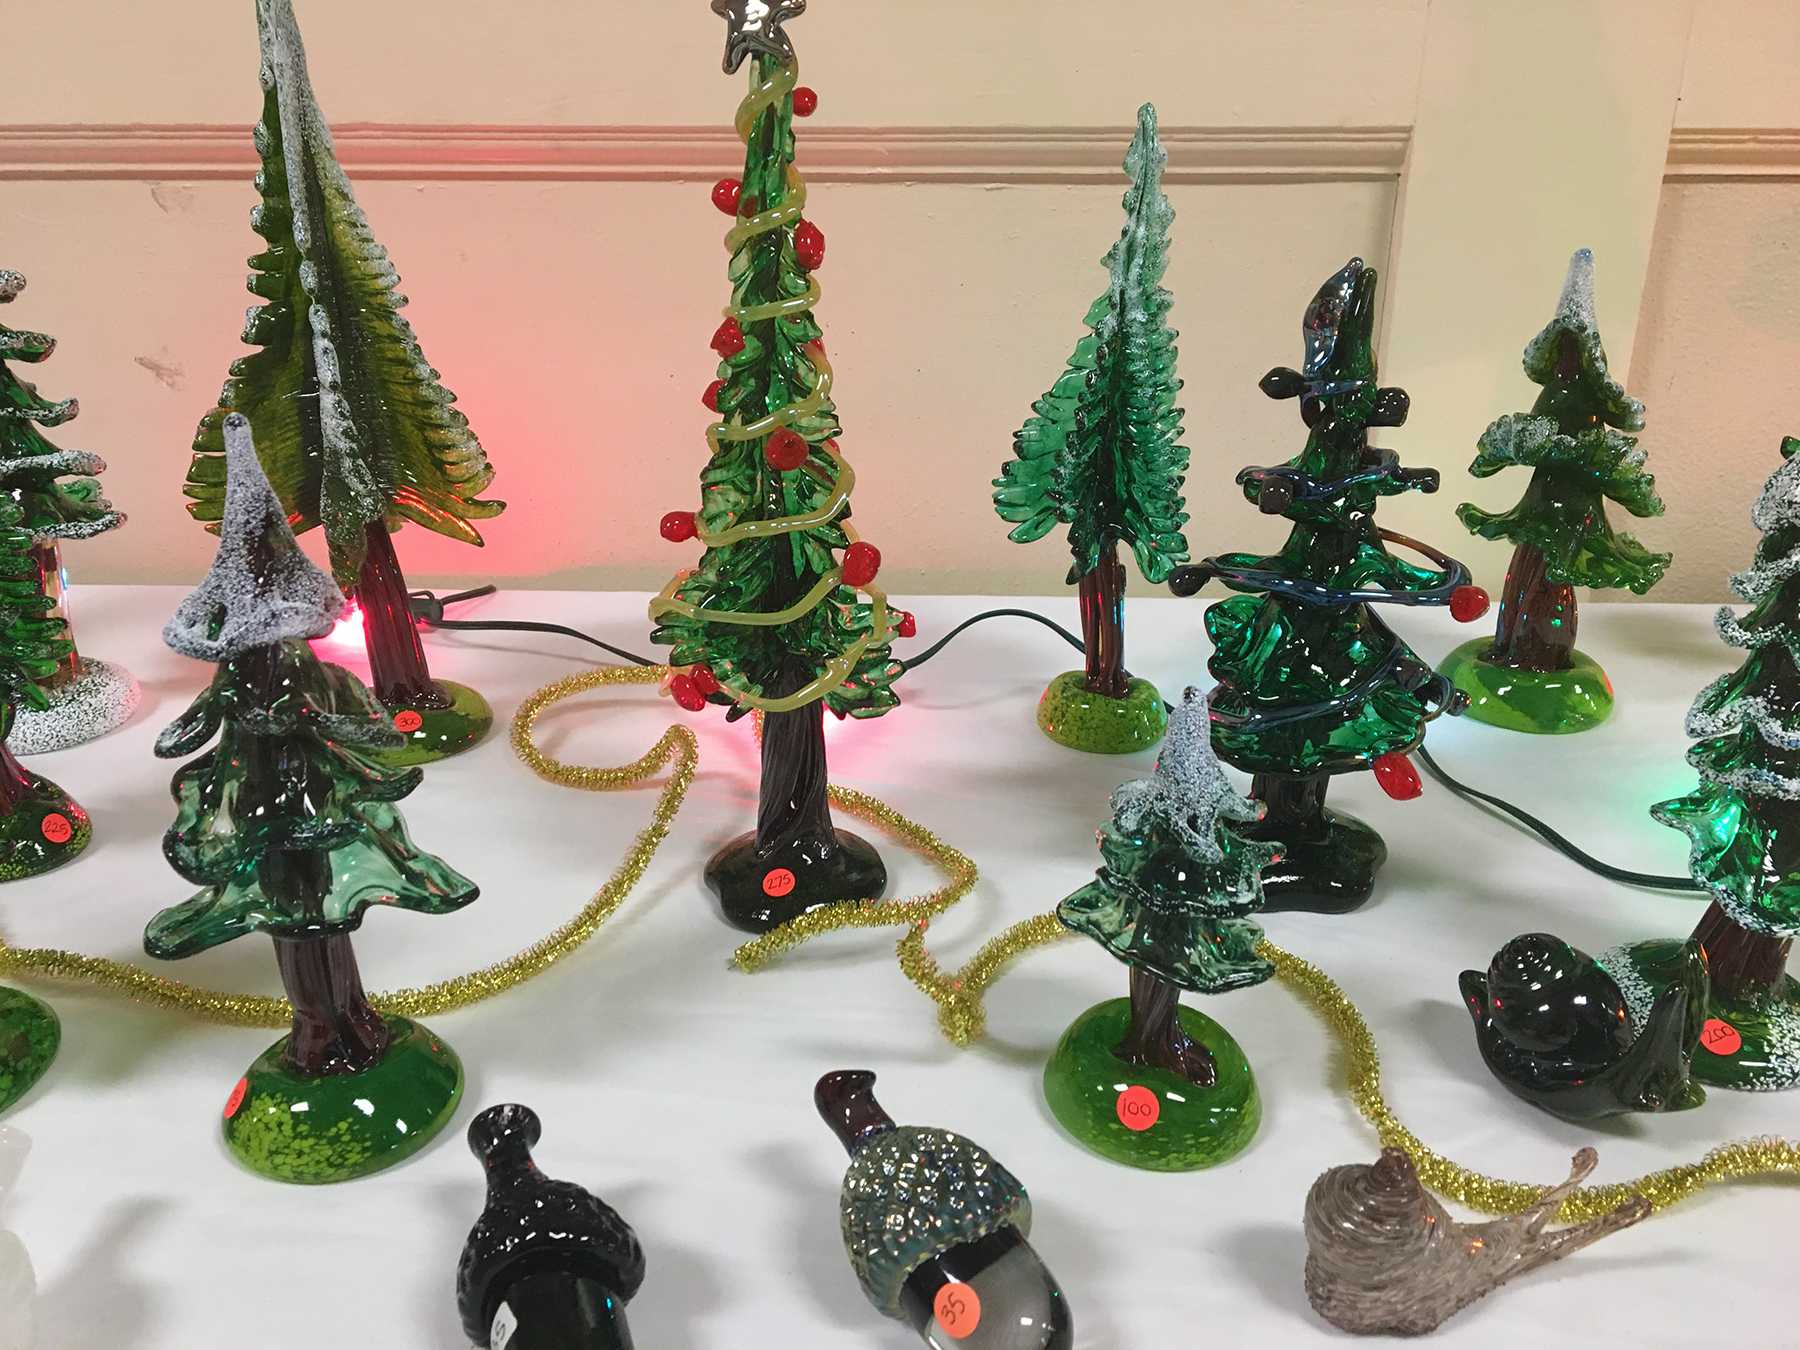 Christmas trees are displayed next to acorns and a whimsical slug sculpture. The glass acorns were first introduced at this year's Fall Fiery Arts Sale, and have continued to be included in the winter sale. Photo: Sophia Muys